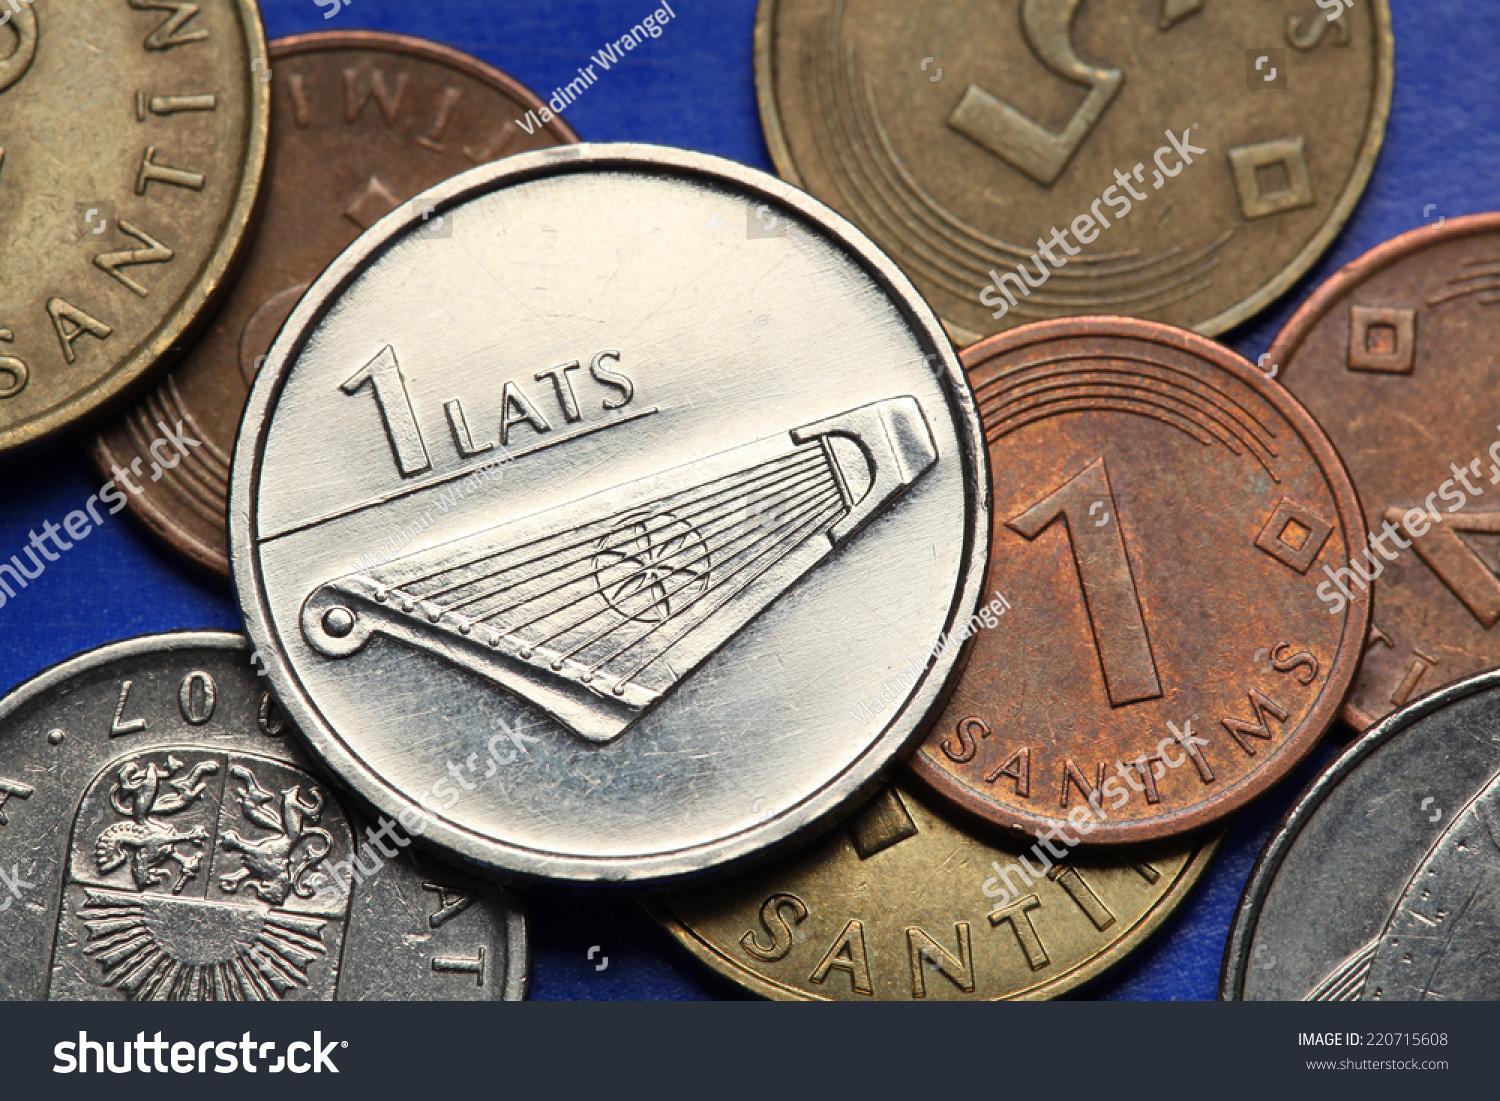 Coins of Latvia. A kokle, a Latvian plucked string musical instrument, depicted in old Latvian one lats coin.  #220715608